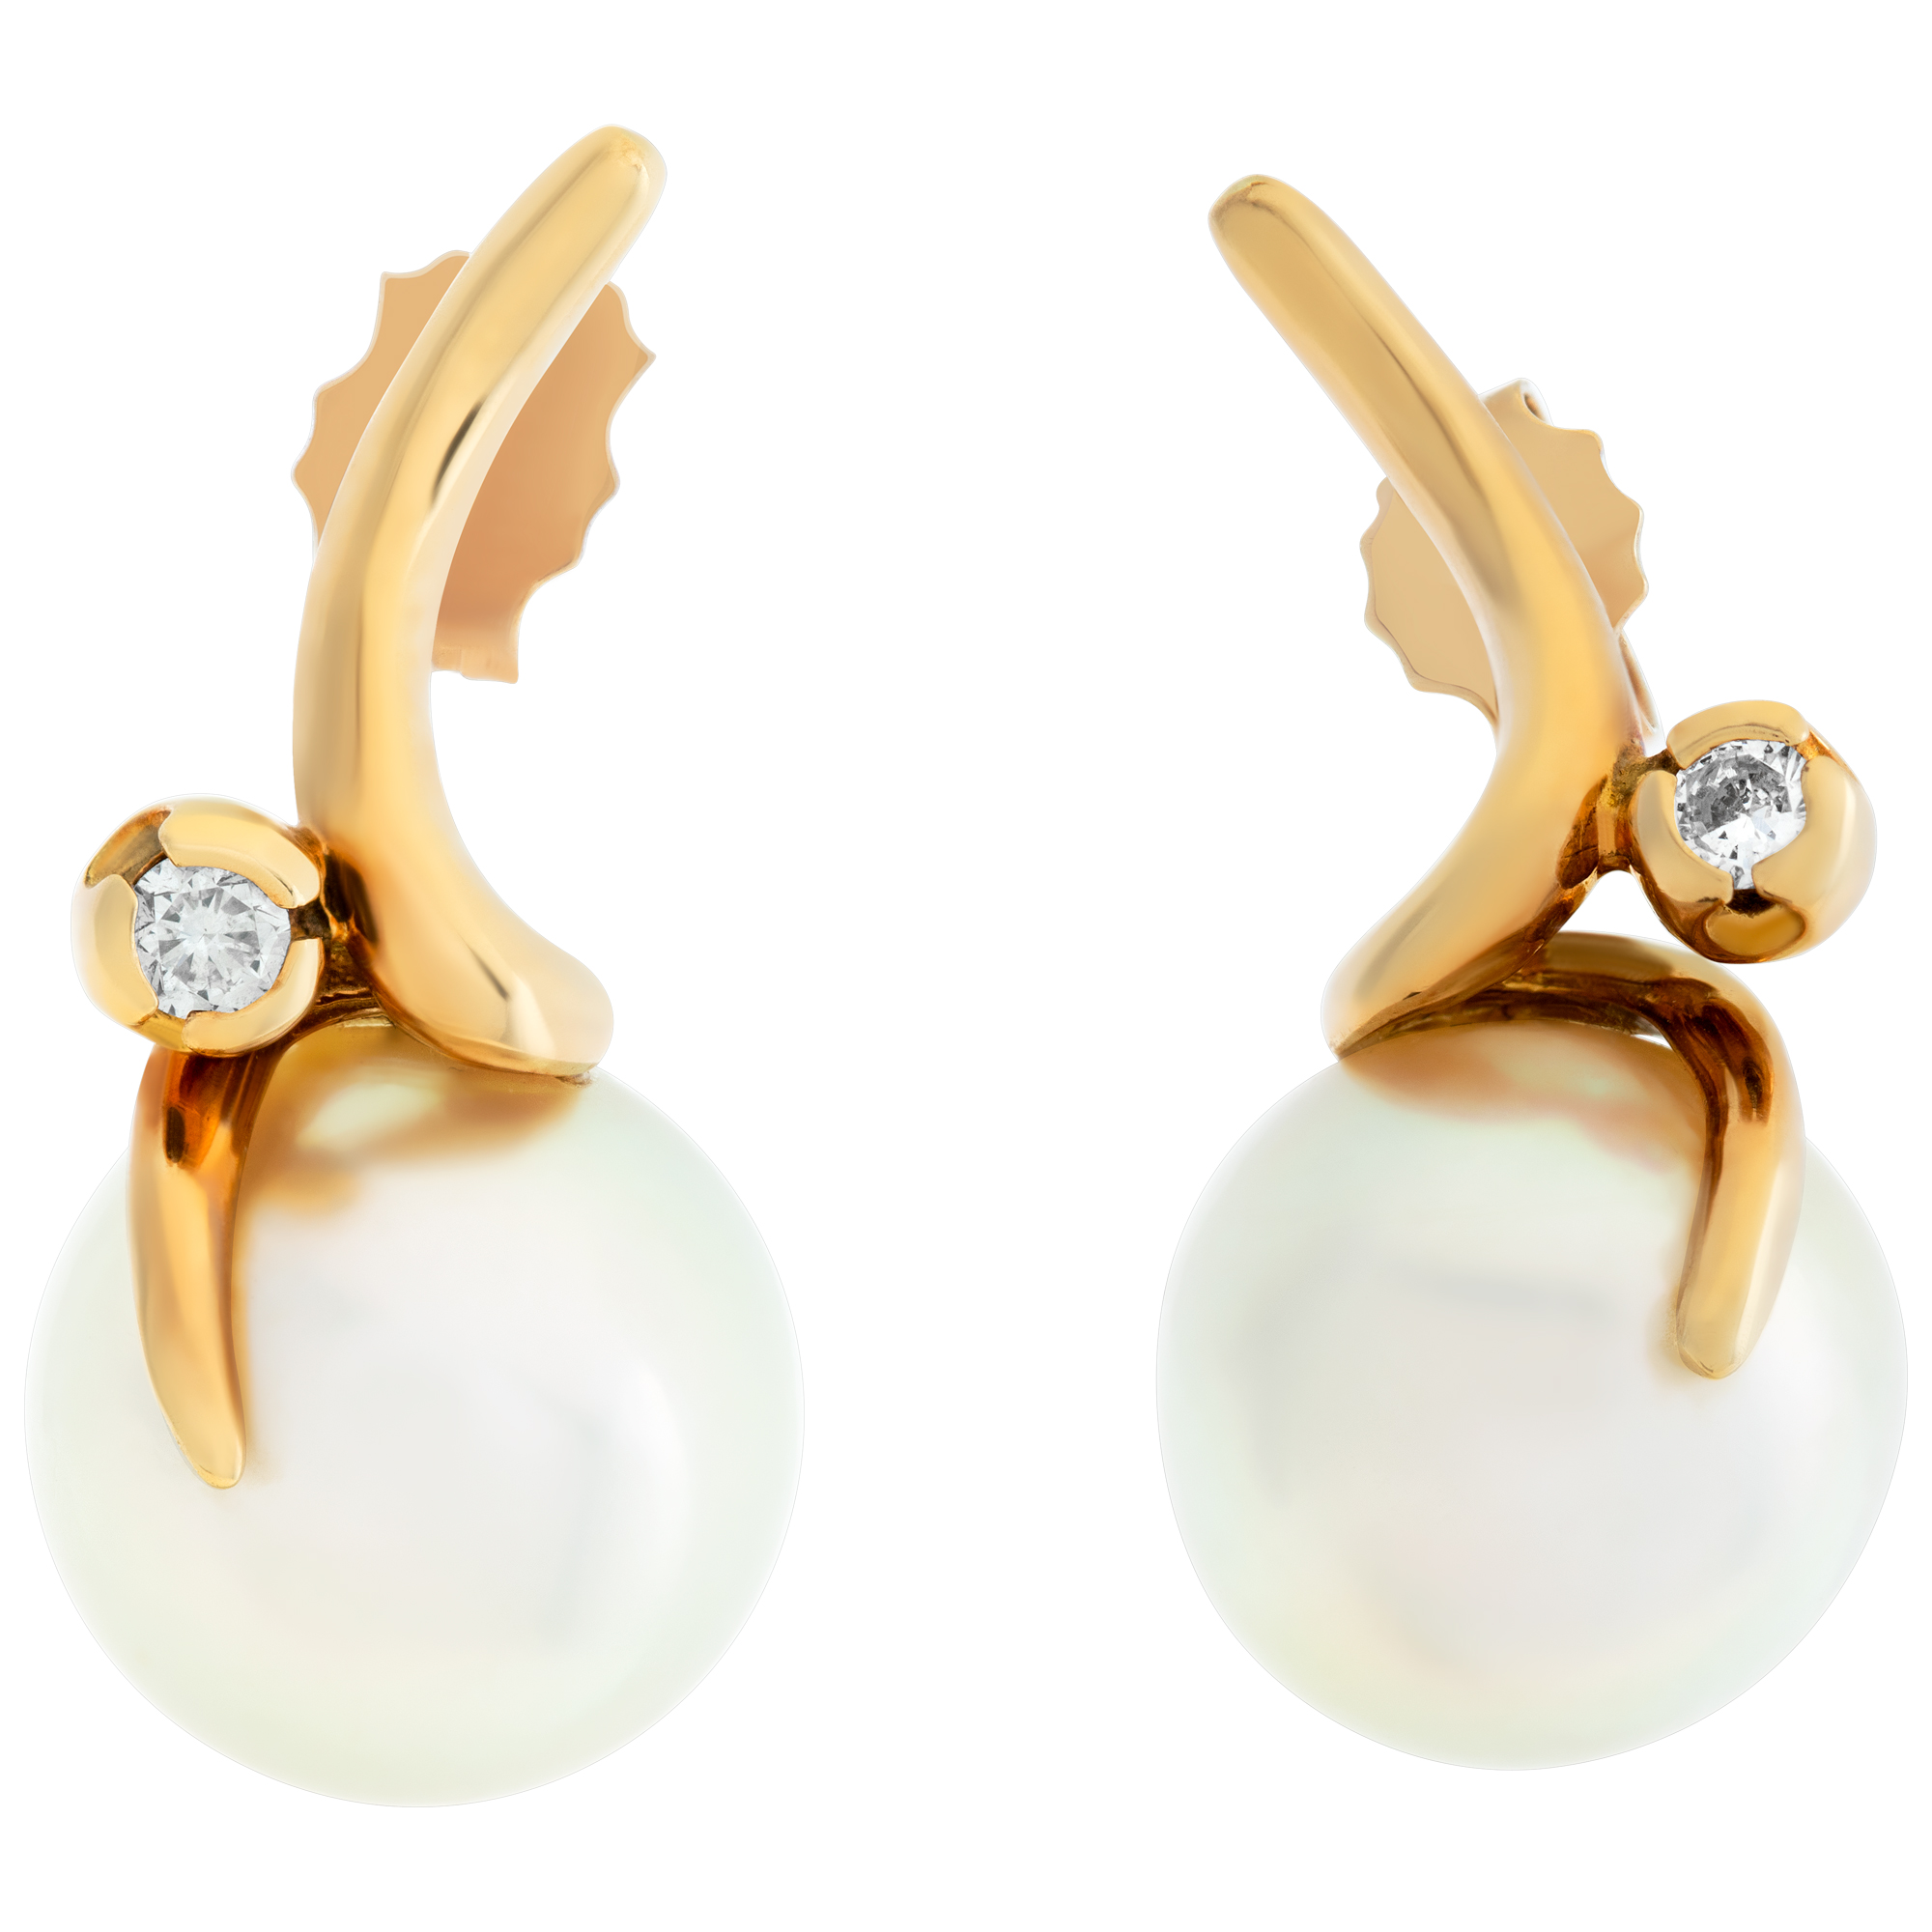 Off round South Sea pearl  (14 x 14.50 mm) & diamonds earrings, set in 18k yellow gold image 1